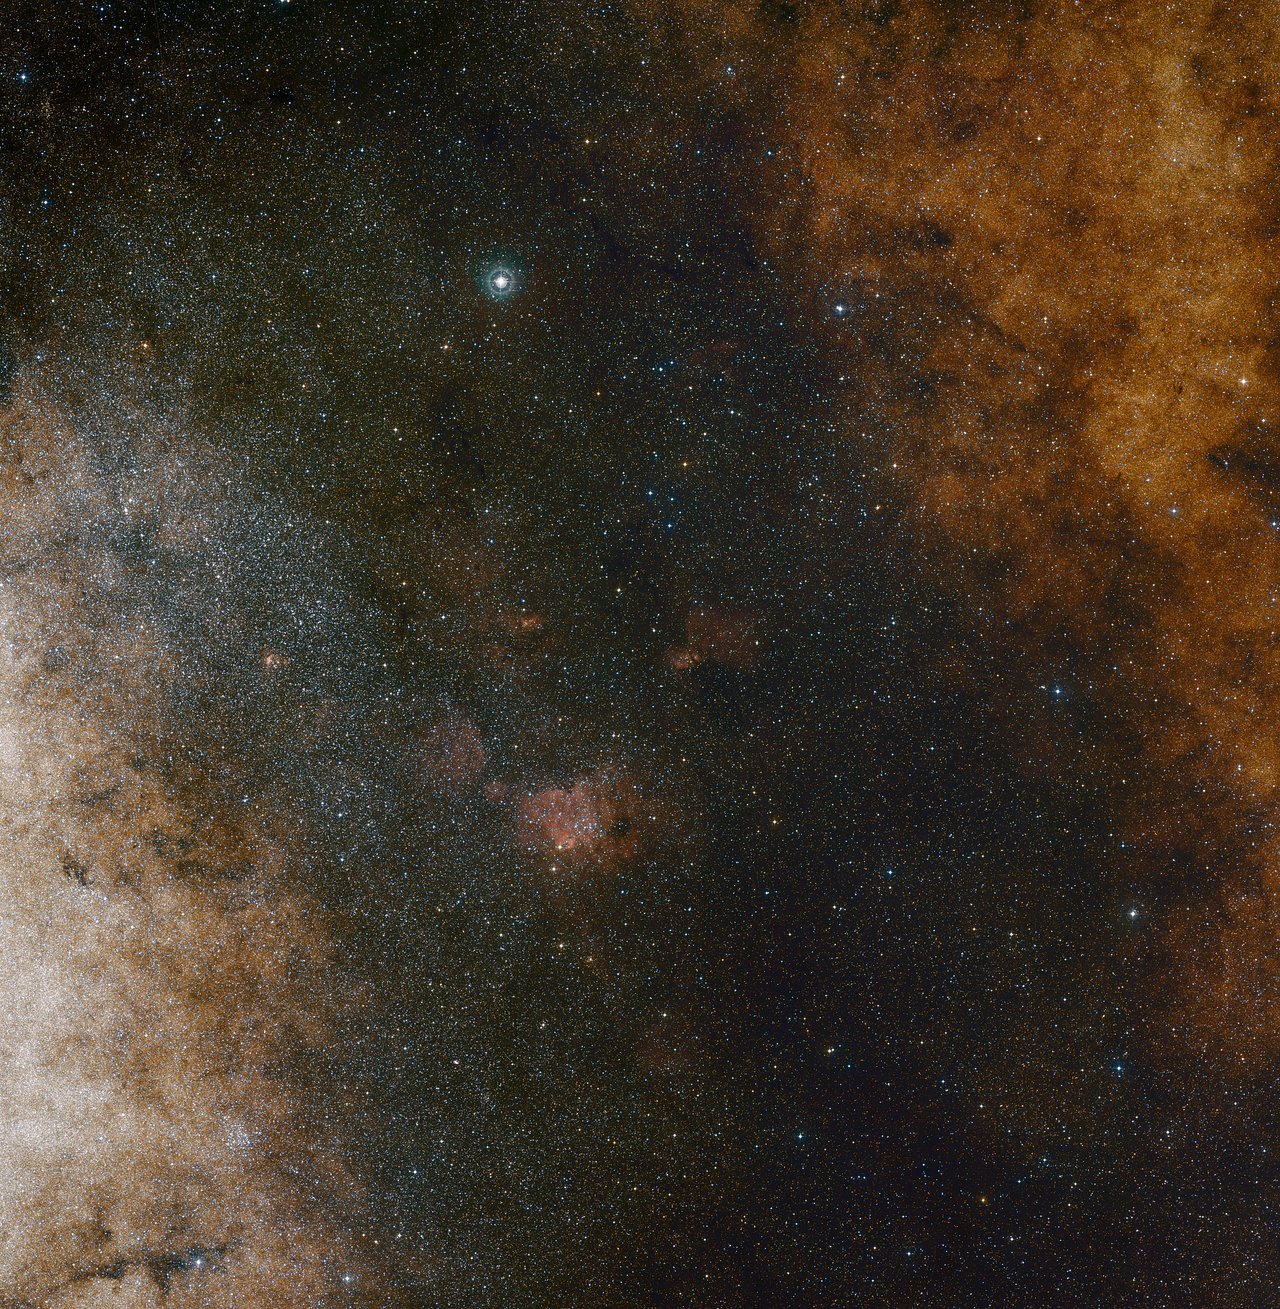 This wide-field view of the center of our Milky Way galaxy shows, in visible light, the vast array of stars contained within this small space. The stars closest to the center of the galaxy, known as S-stars, are orbiting SgrA*, a massive black hole. The orbits of these stars are helping scientists to better understand the black hole and the nature of our galaxy. This view was created from photographs in red and blue light and forming part of the Digitized Sky Survey 2. The field of view is approximately 3.5 degrees x 3.6 degrees.